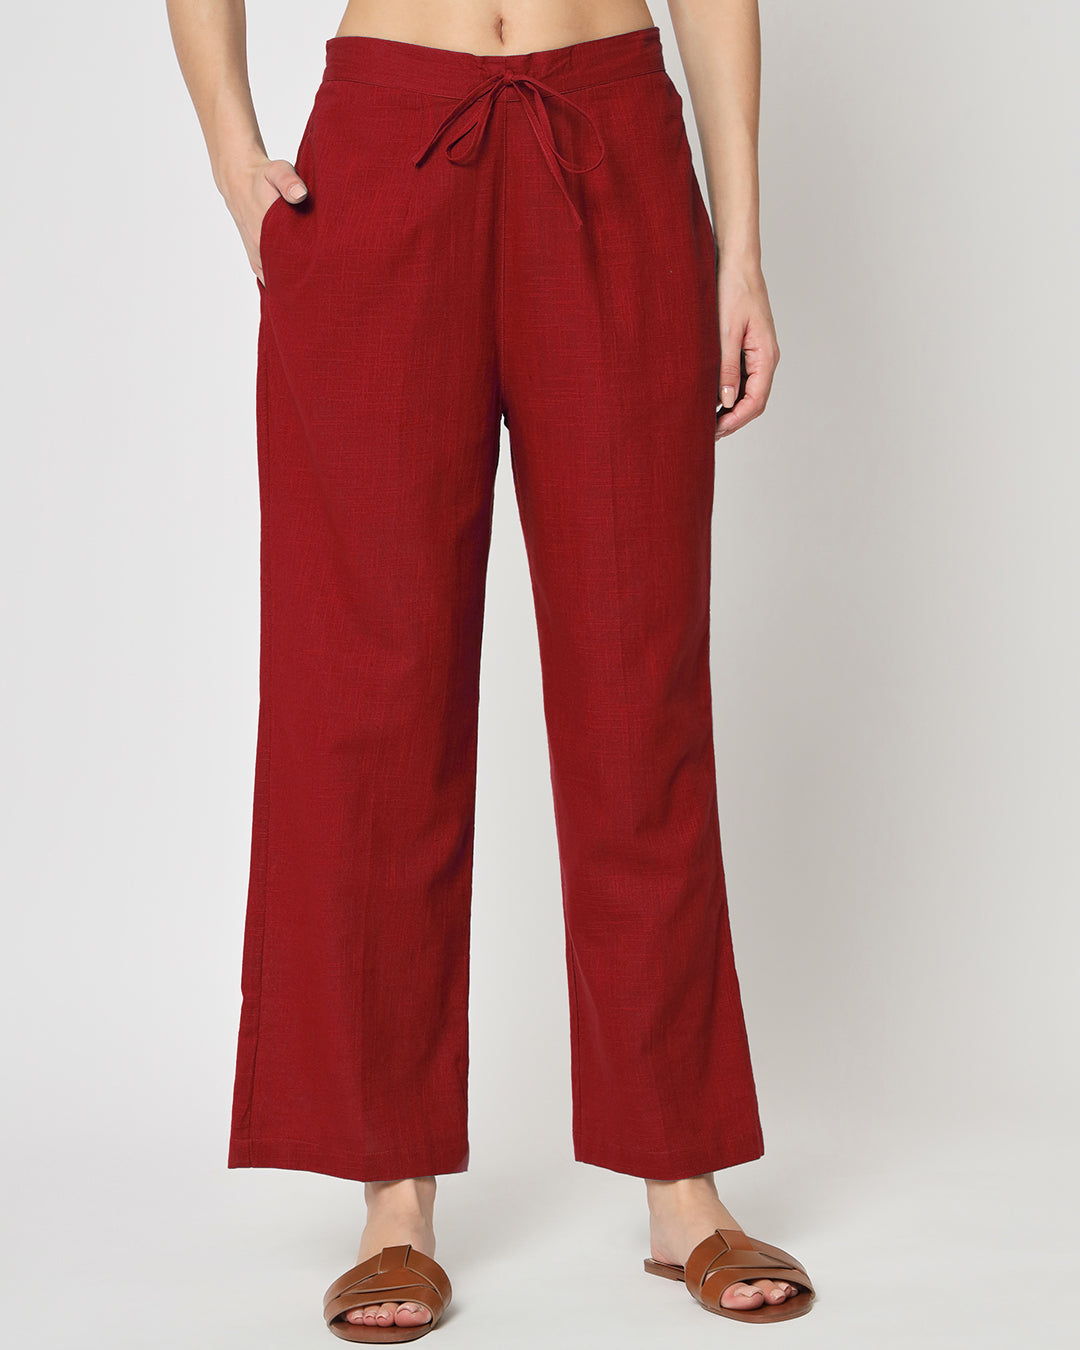 Combo: Iced Grey & Classic Red Straight Pants- Set of 2